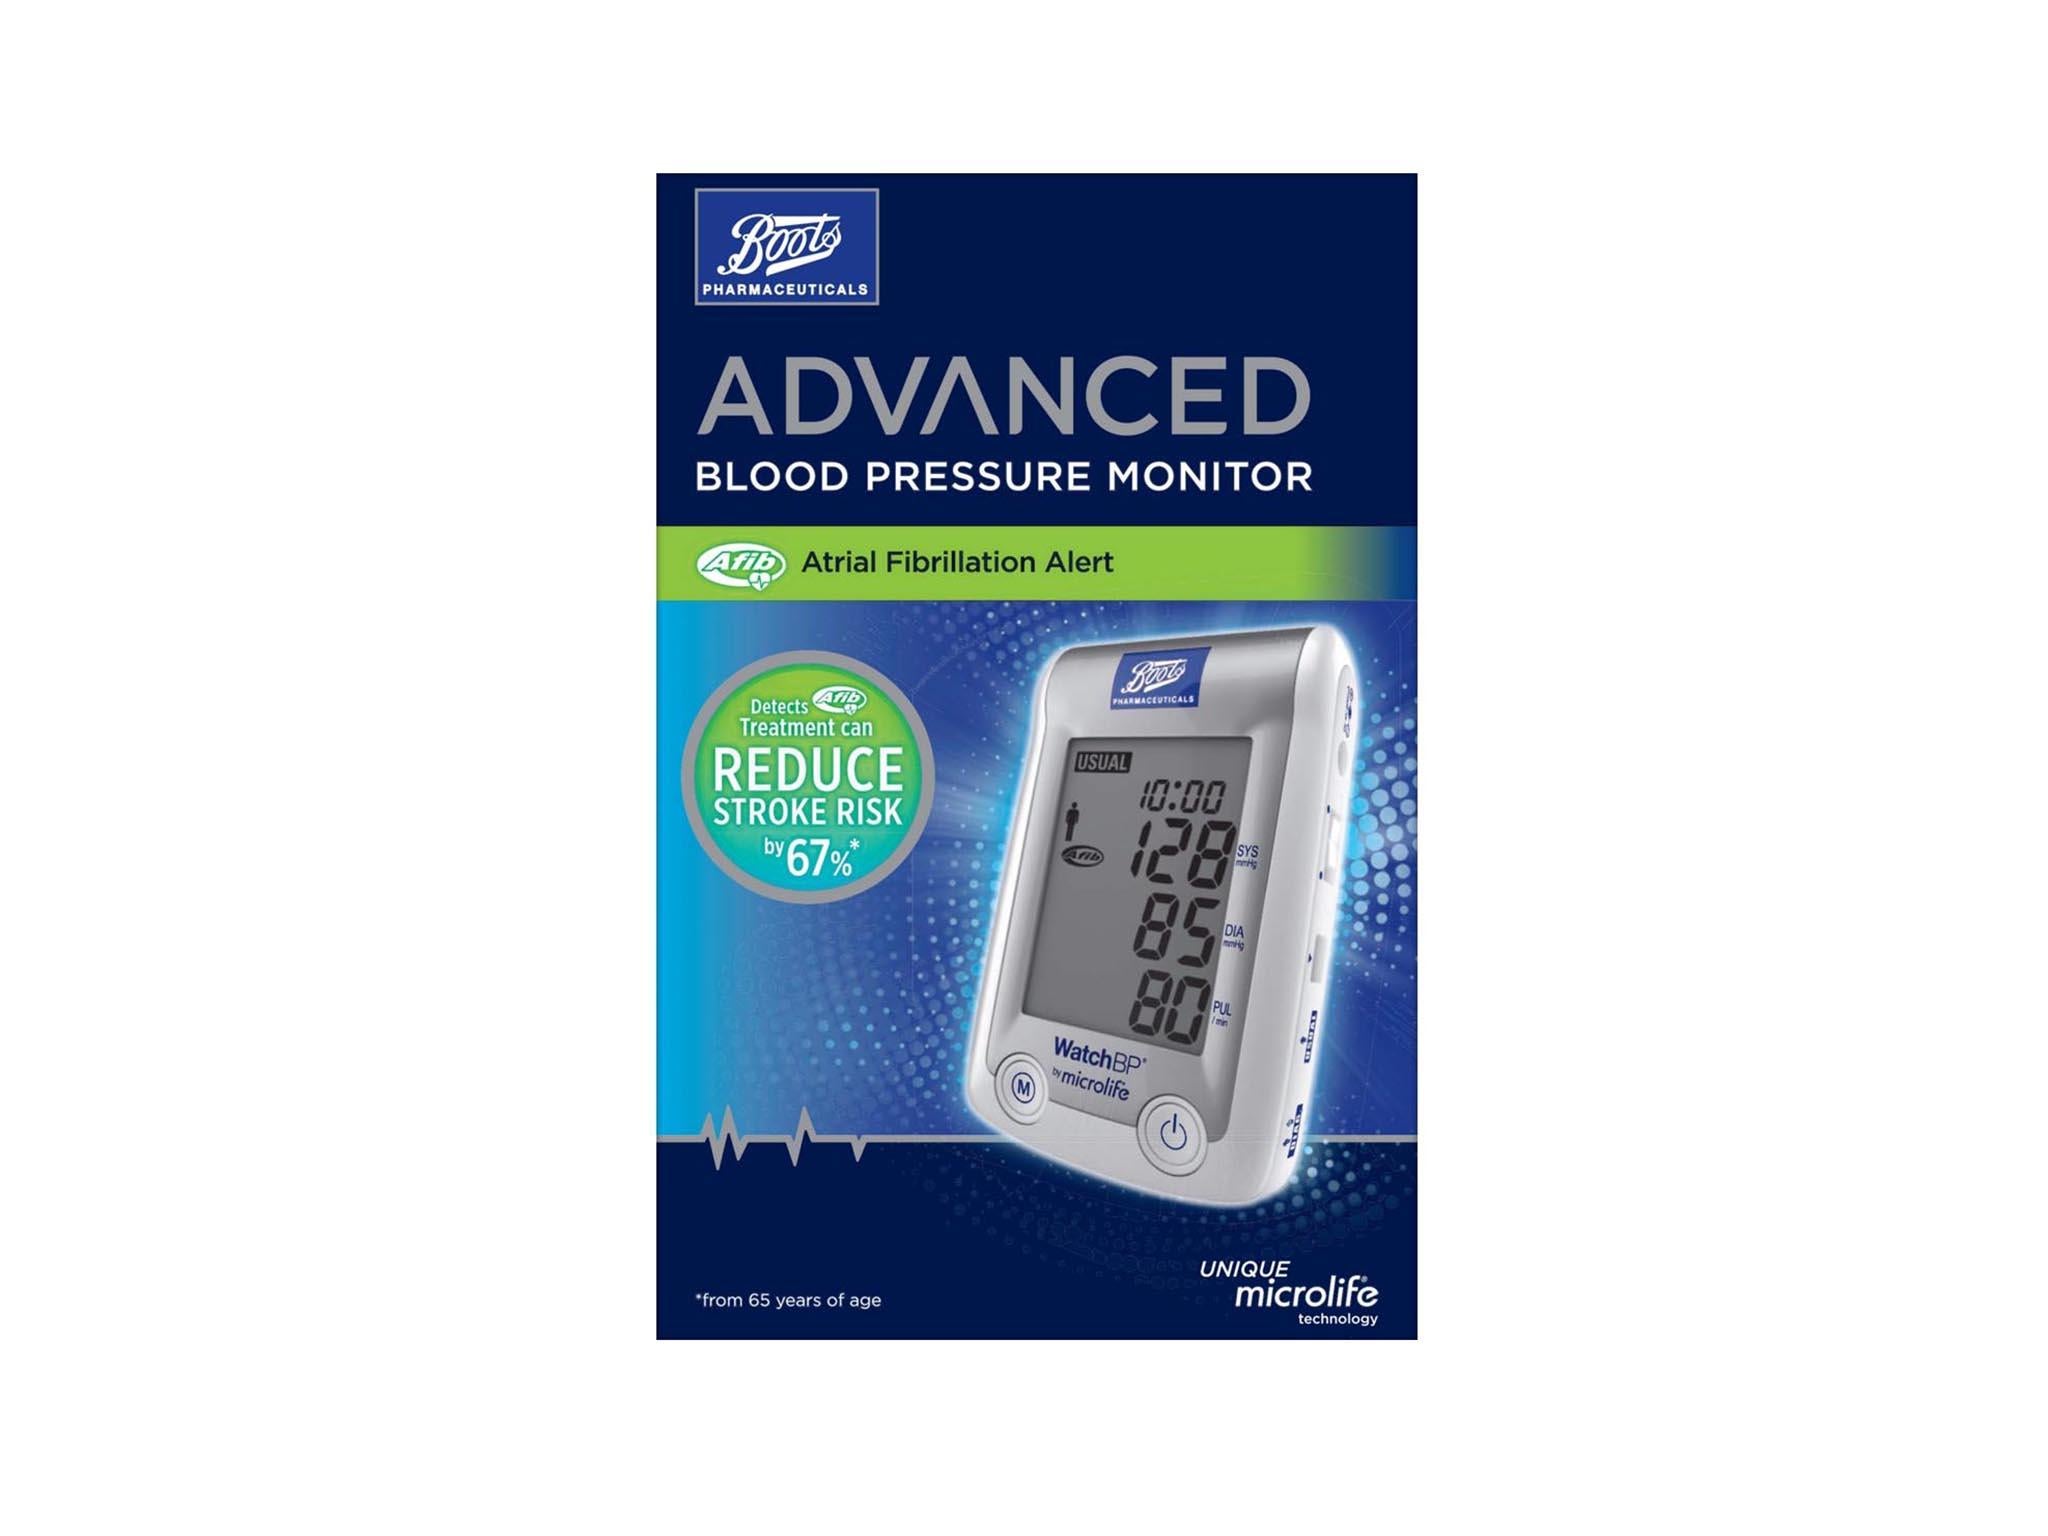 https://static.independent.co.uk/s3fs-public/thumbnails/image/2019/09/03/10/boots-advanced-blood-pressure-monitor.jpg